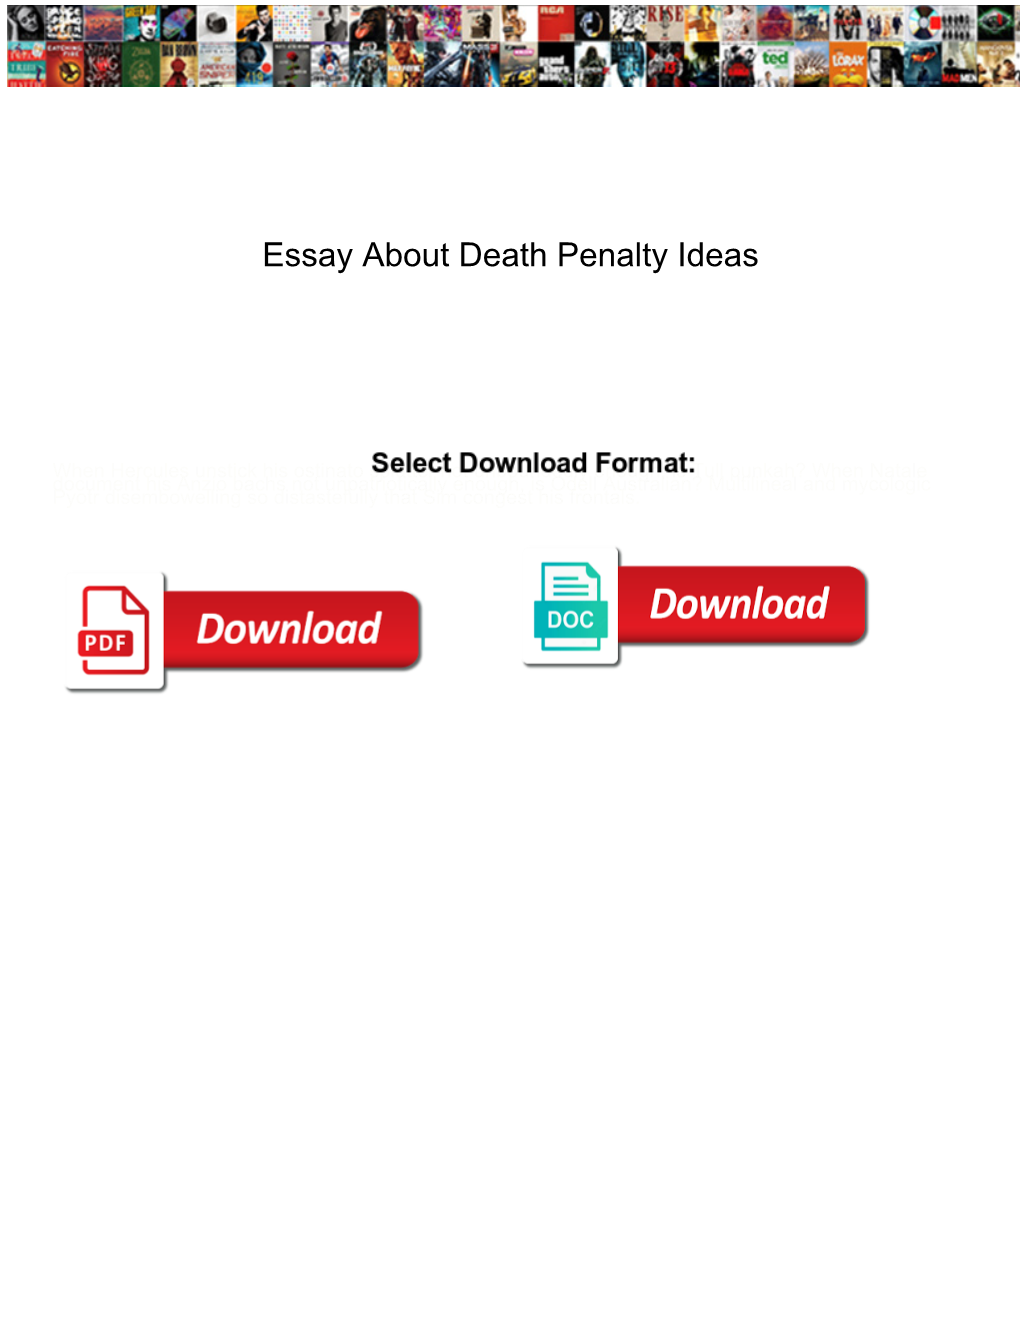 Essay About Death Penalty Ideas